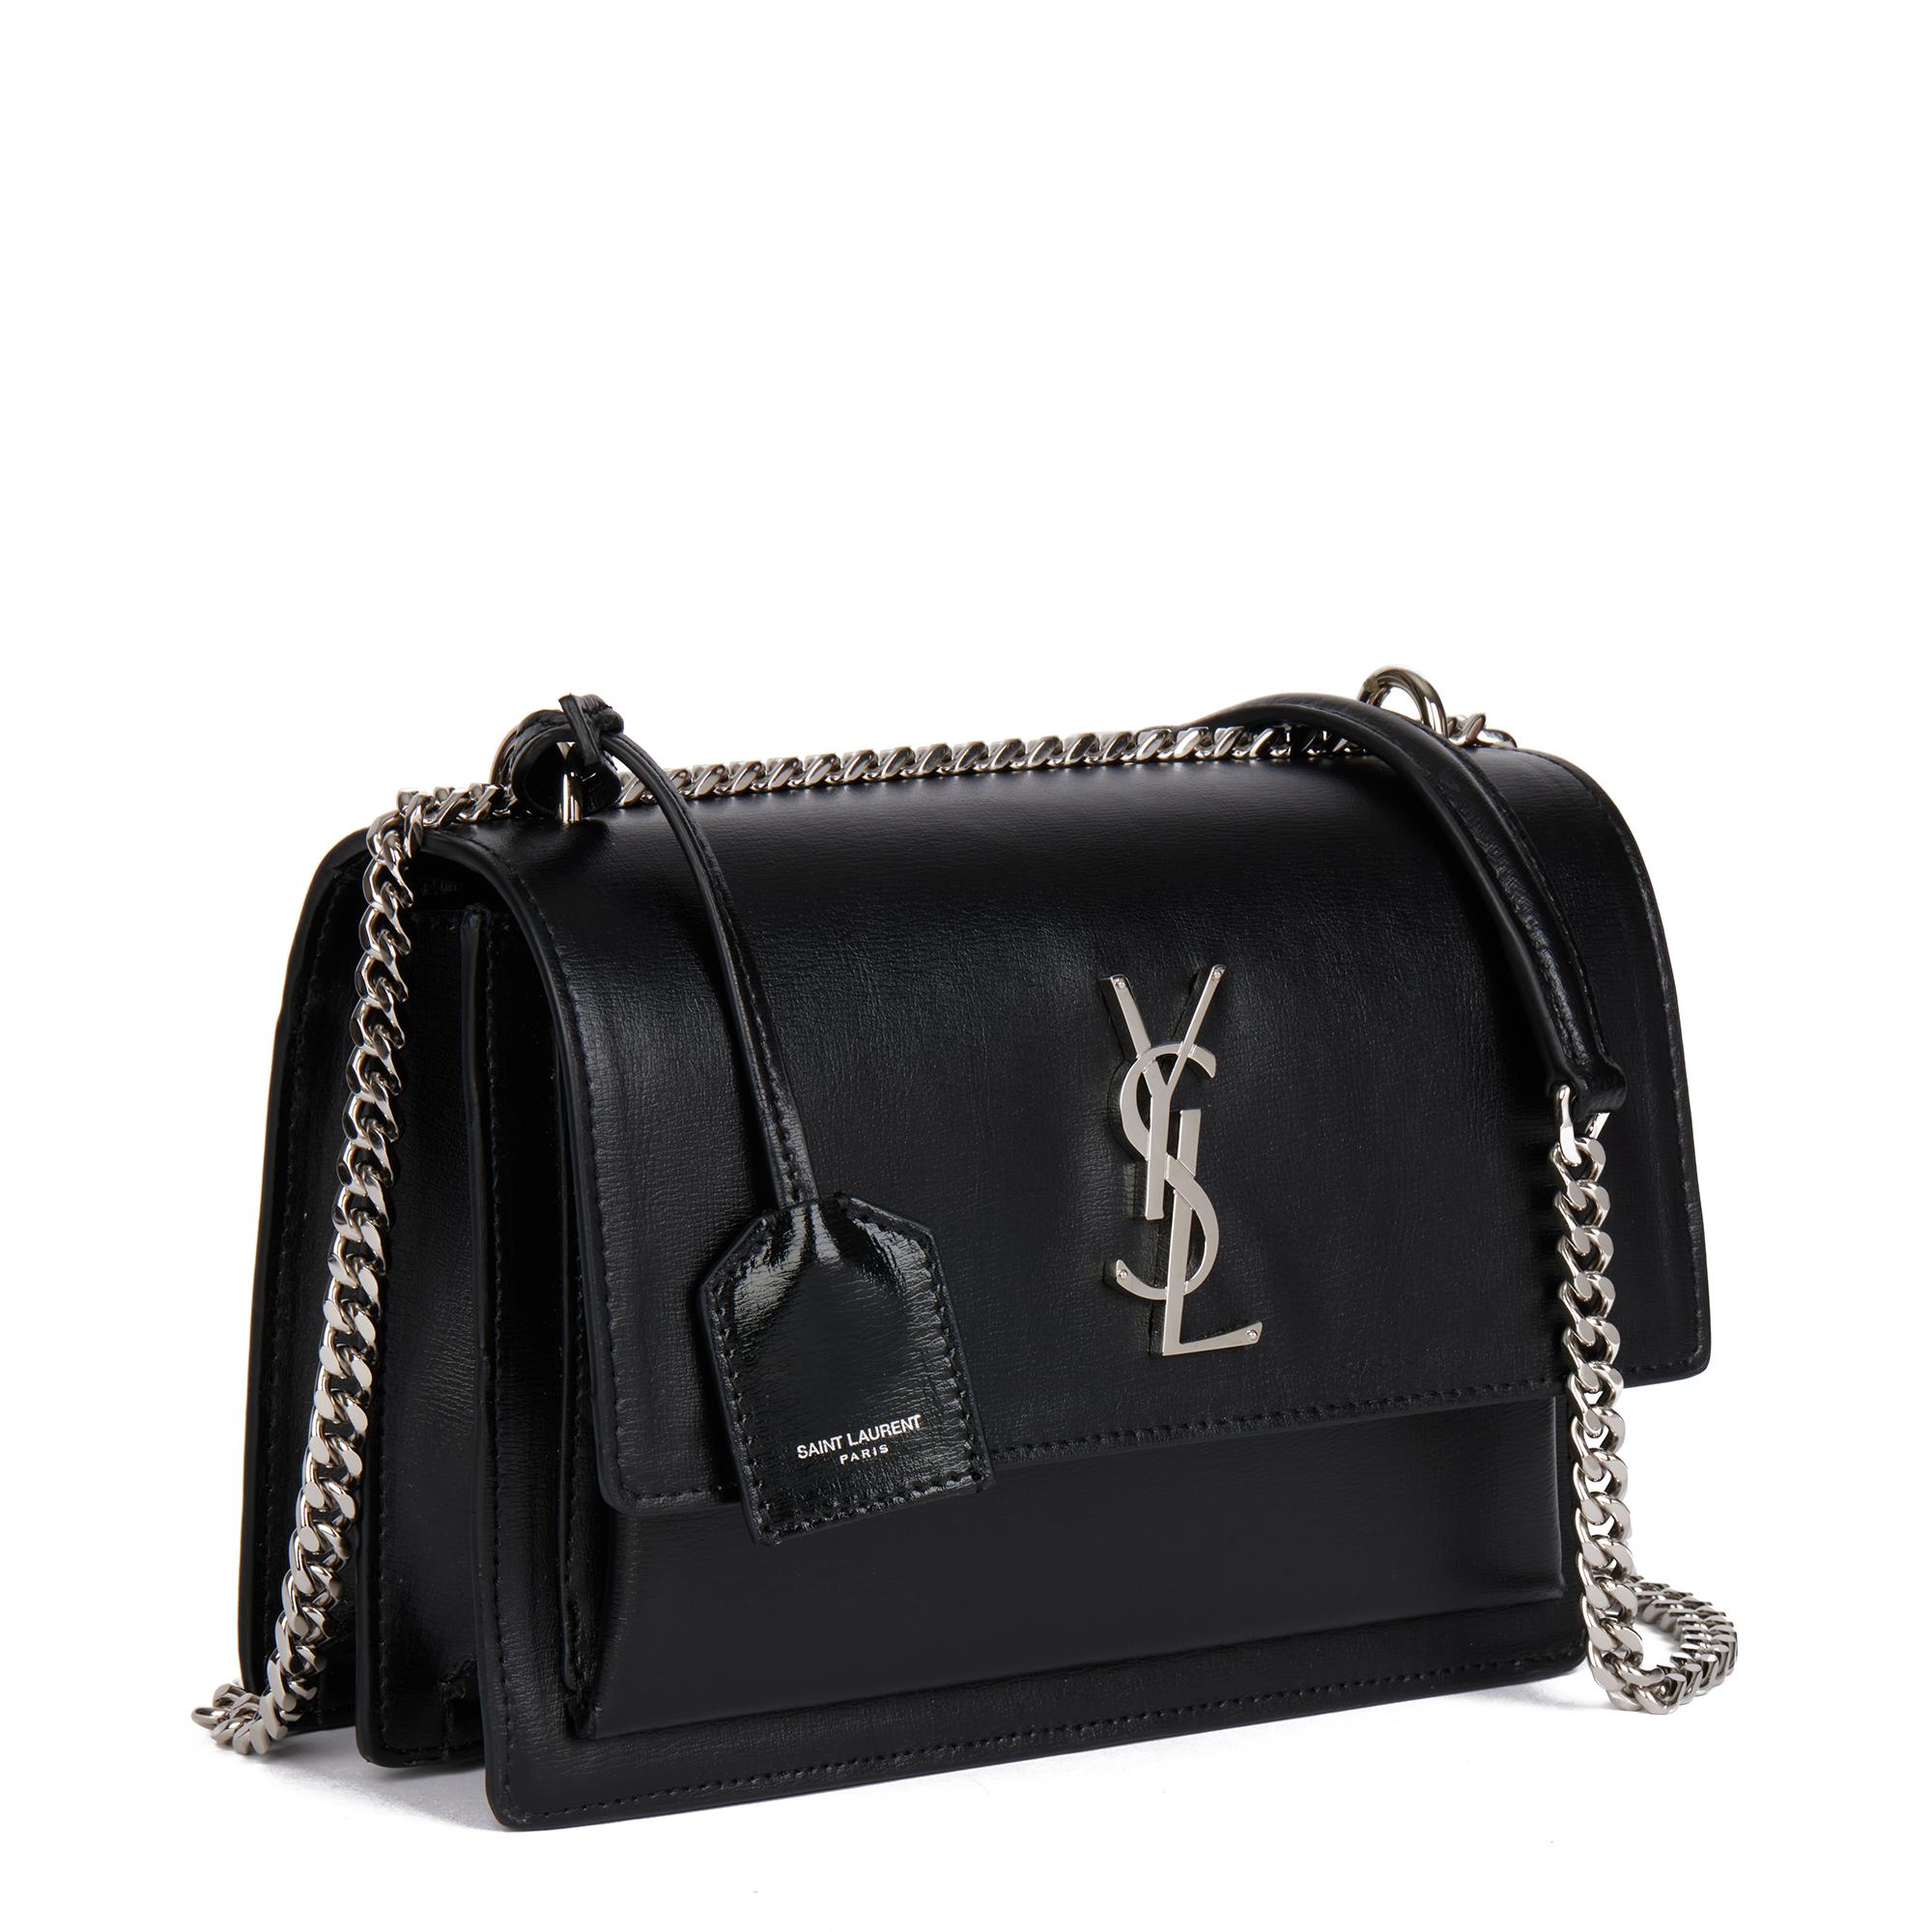 SAINT LAURENT
Black Smooth Calfskin Leather Medium Sunset

Xupes Reference: HB4628
Serial Number: GAB442906. 0821
Age (Circa): 2022
Accompanied By: Saint Laurent Dust Bag, Clochette, Care Booklet
Authenticity Details: Date Stamp (Made in